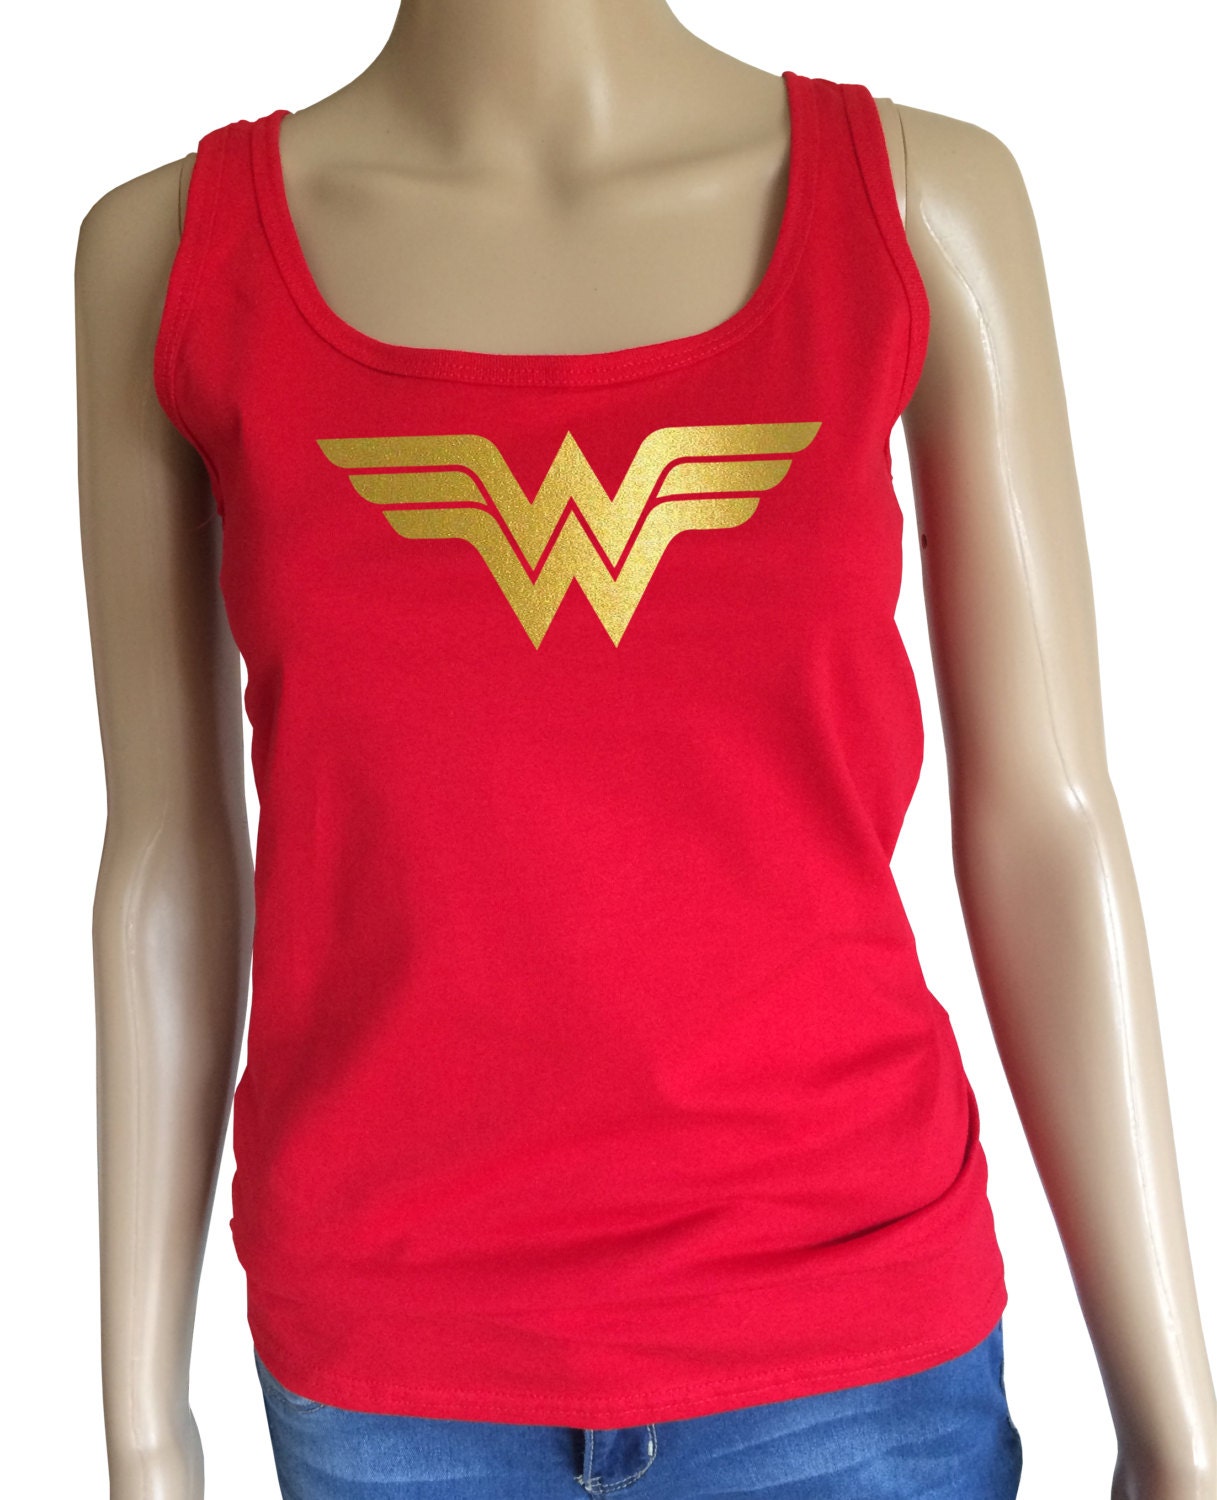 Womans Wonder woman tank top with shiny gold logo.